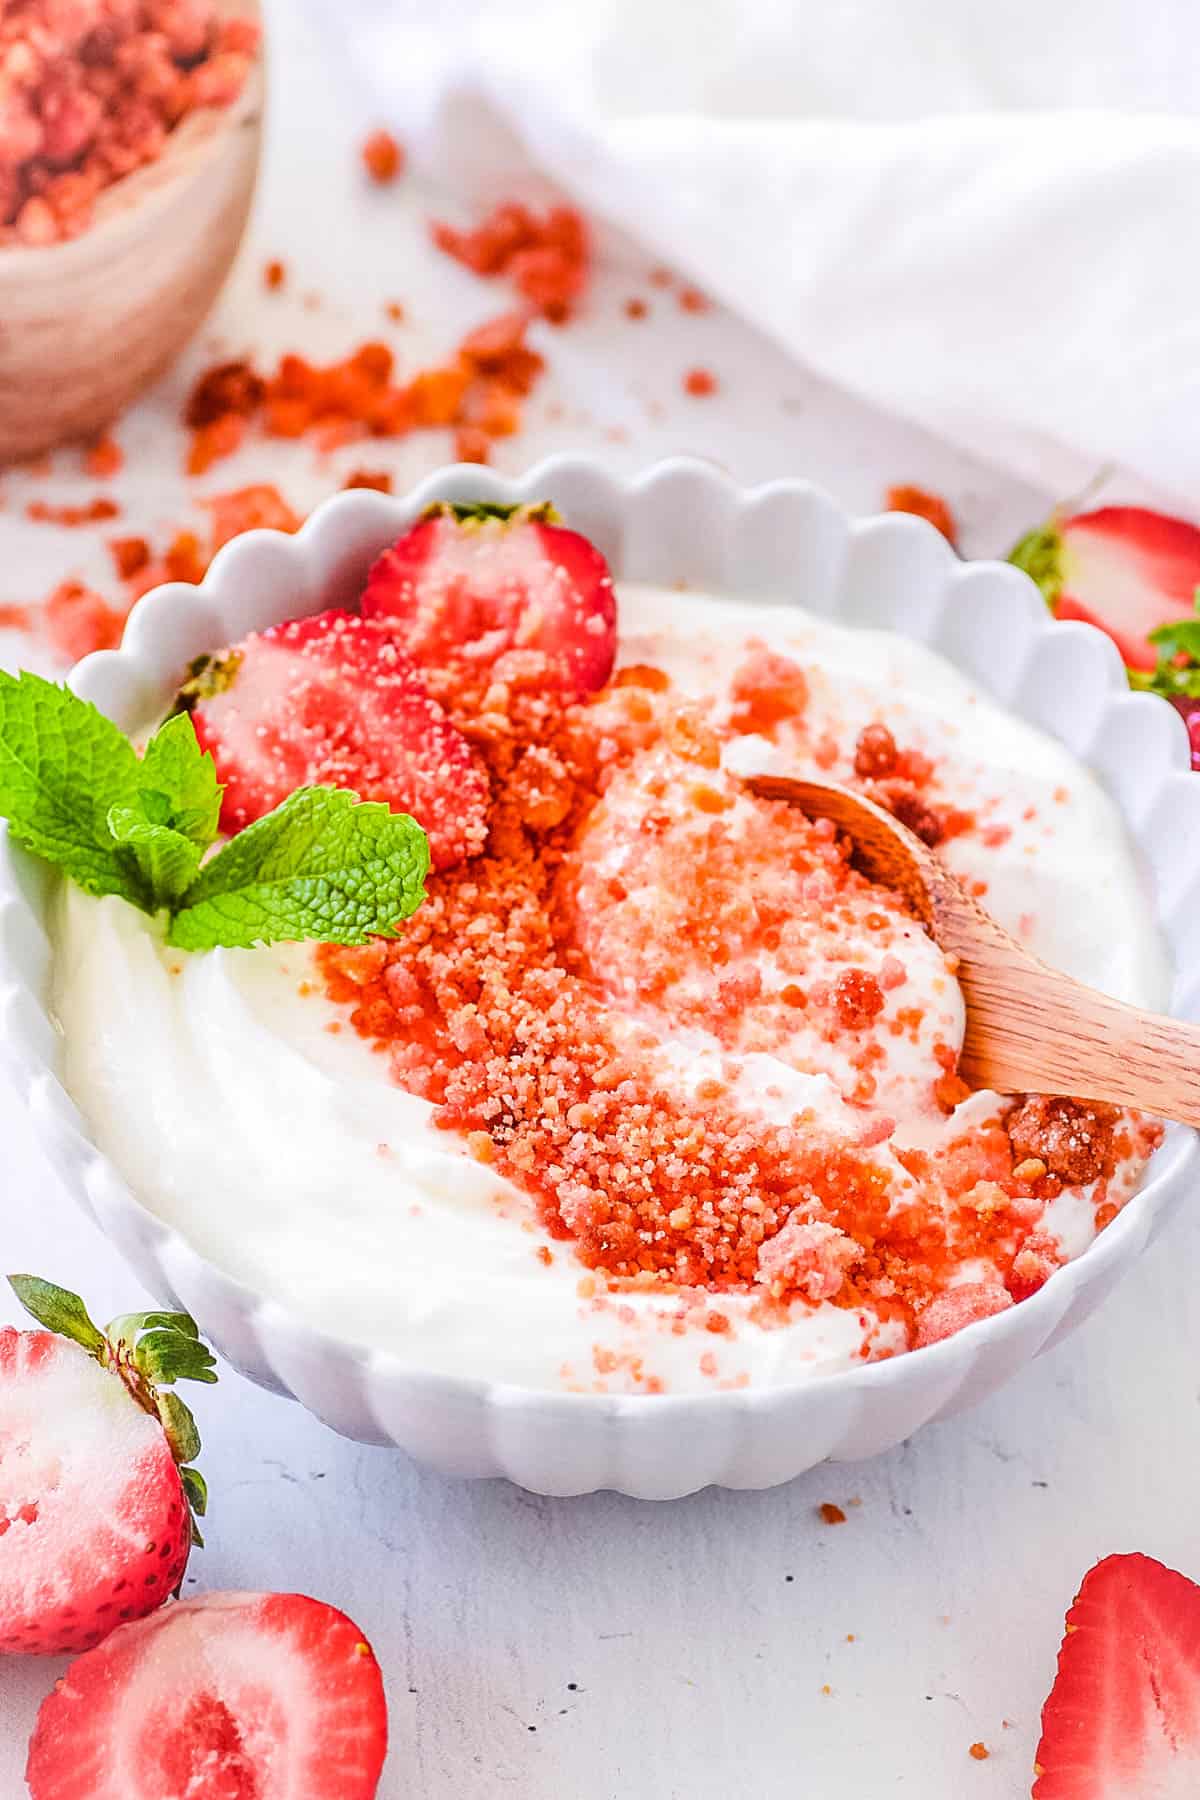 Strawberry crumble topping added on top of yogurt, in a white bowl, garnished with strawberries and mint.